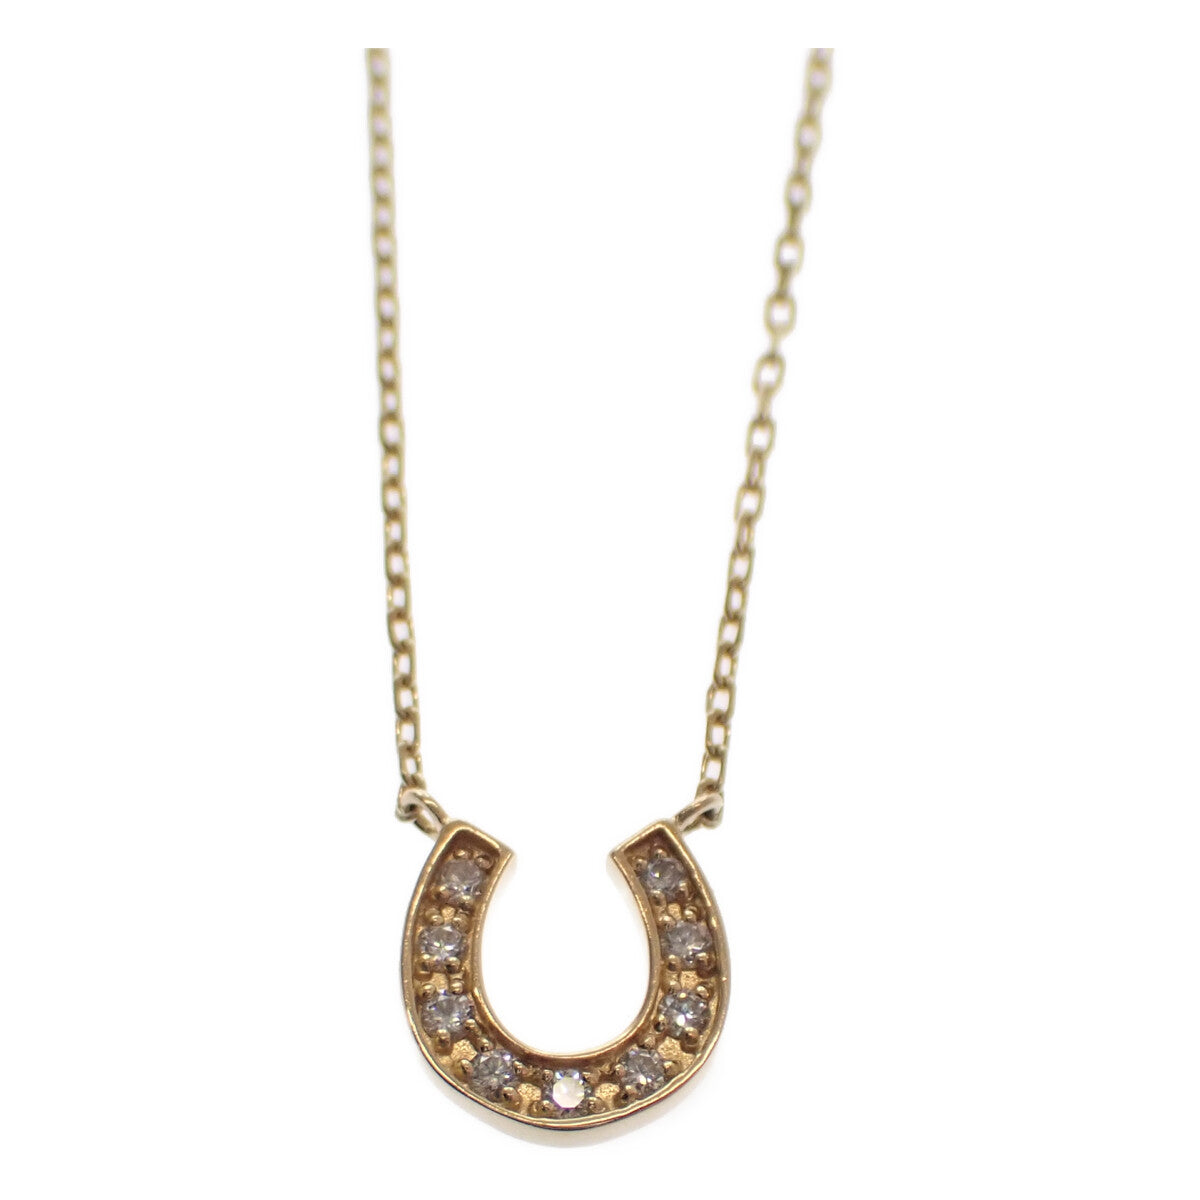 [LuxUness]  K18 Yellow Gold"Ponte Vecchio" Horseshoe Necklace with 0.04ct Diamond Pendant - Exquisite Jewelry for Women- Gold- (Pre-owned) in Excellent condition